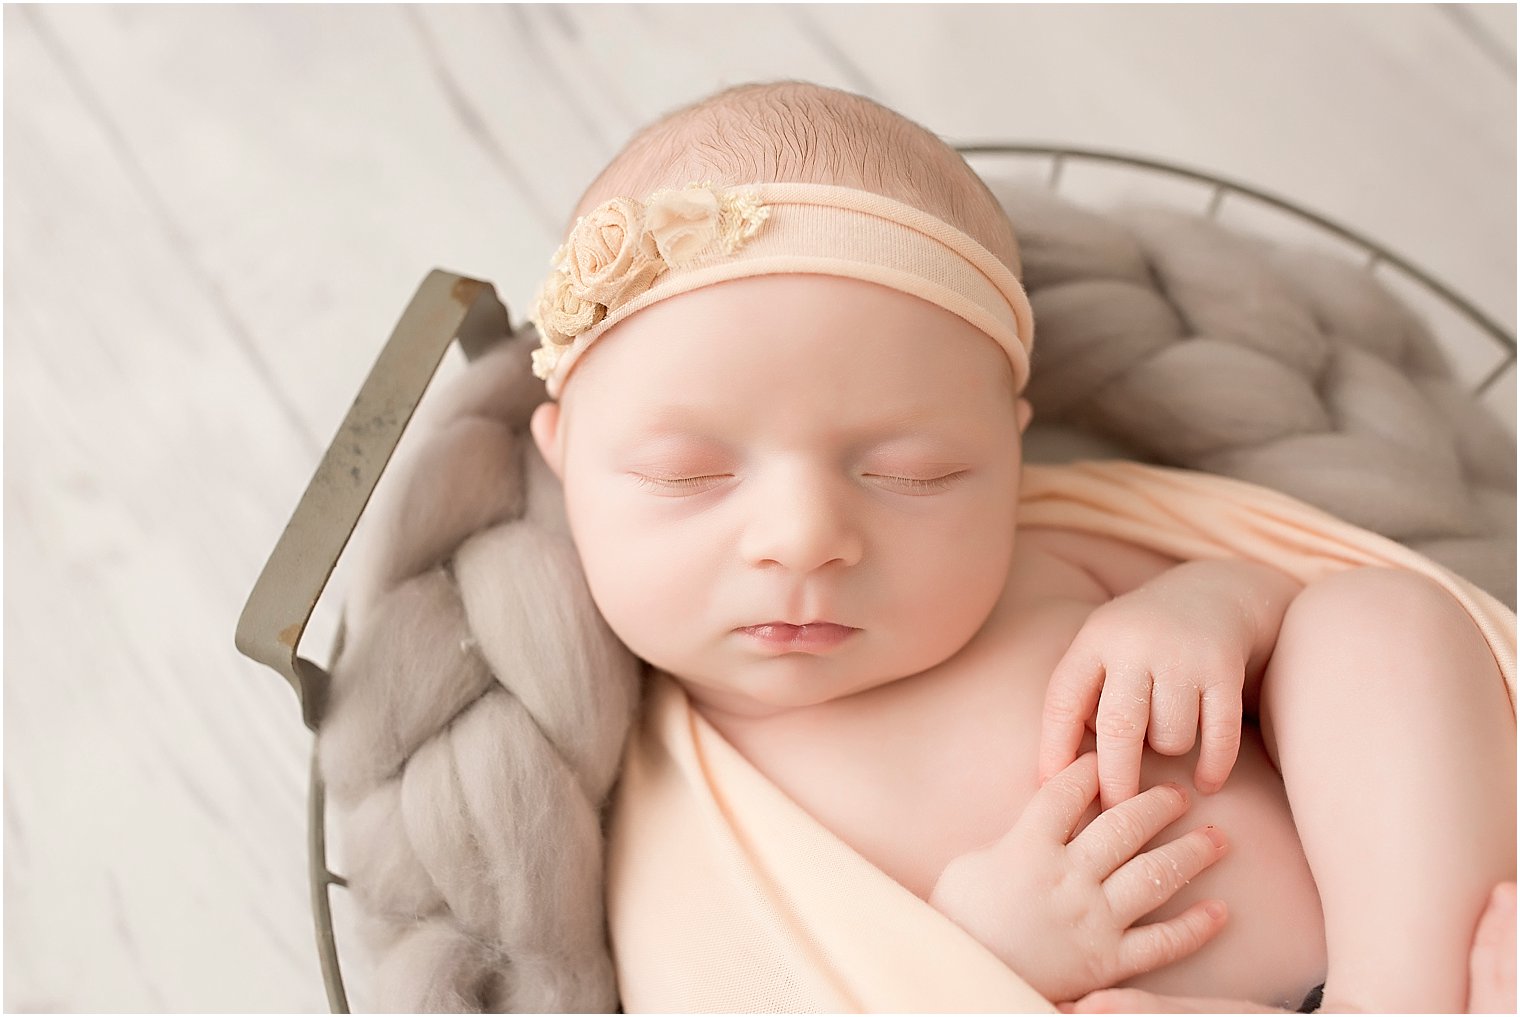 Baby girl asleep in a wire basket during newborn session